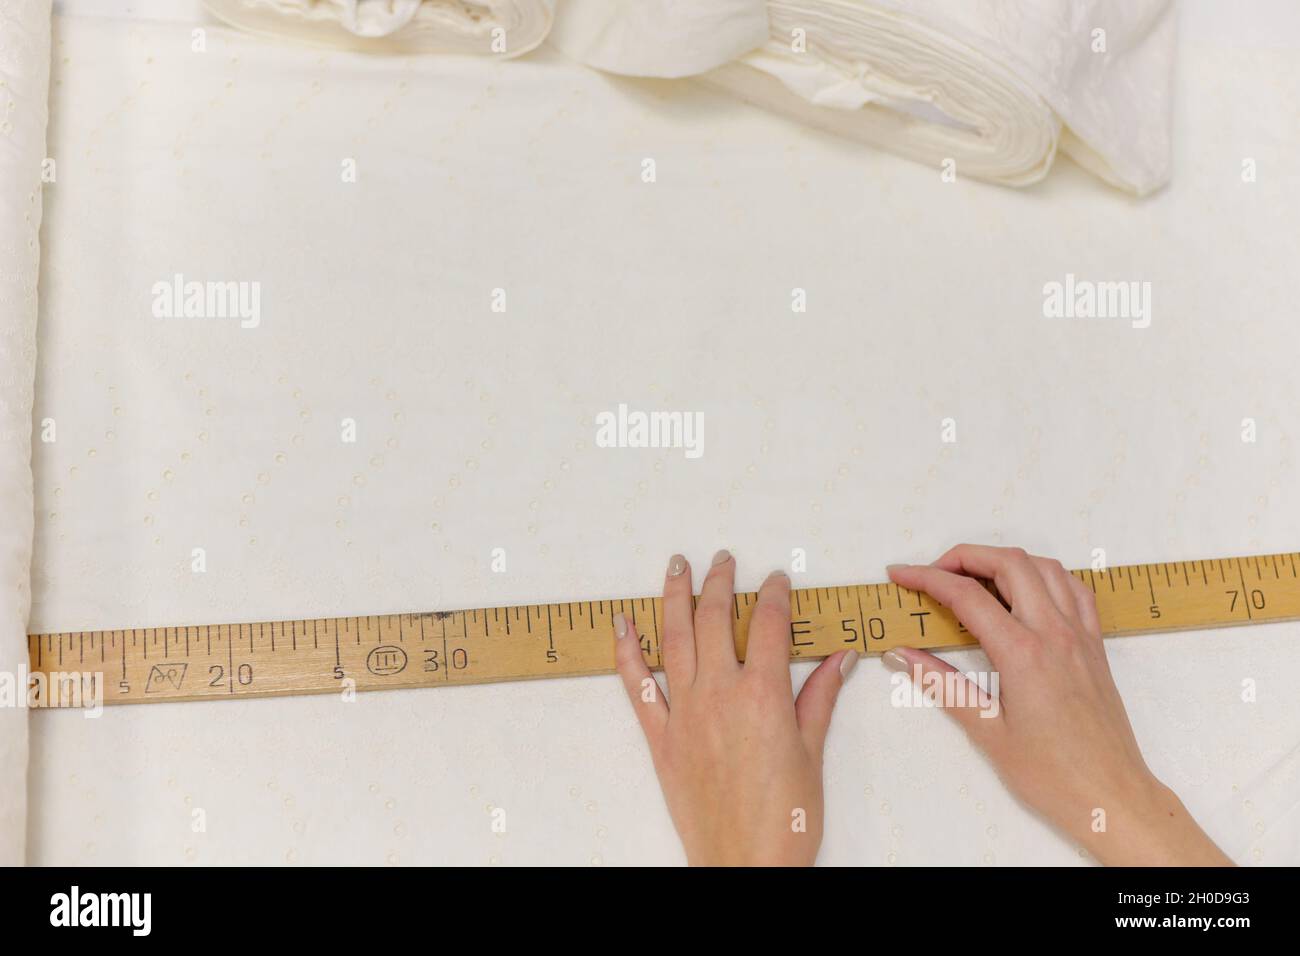 https://c8.alamy.com/comp/2H0D9G3/female-hands-using-wooden-tailor-ruler-to-measure-cotton-fabric-textile-sale-and-sewing-concept-2H0D9G3.jpg